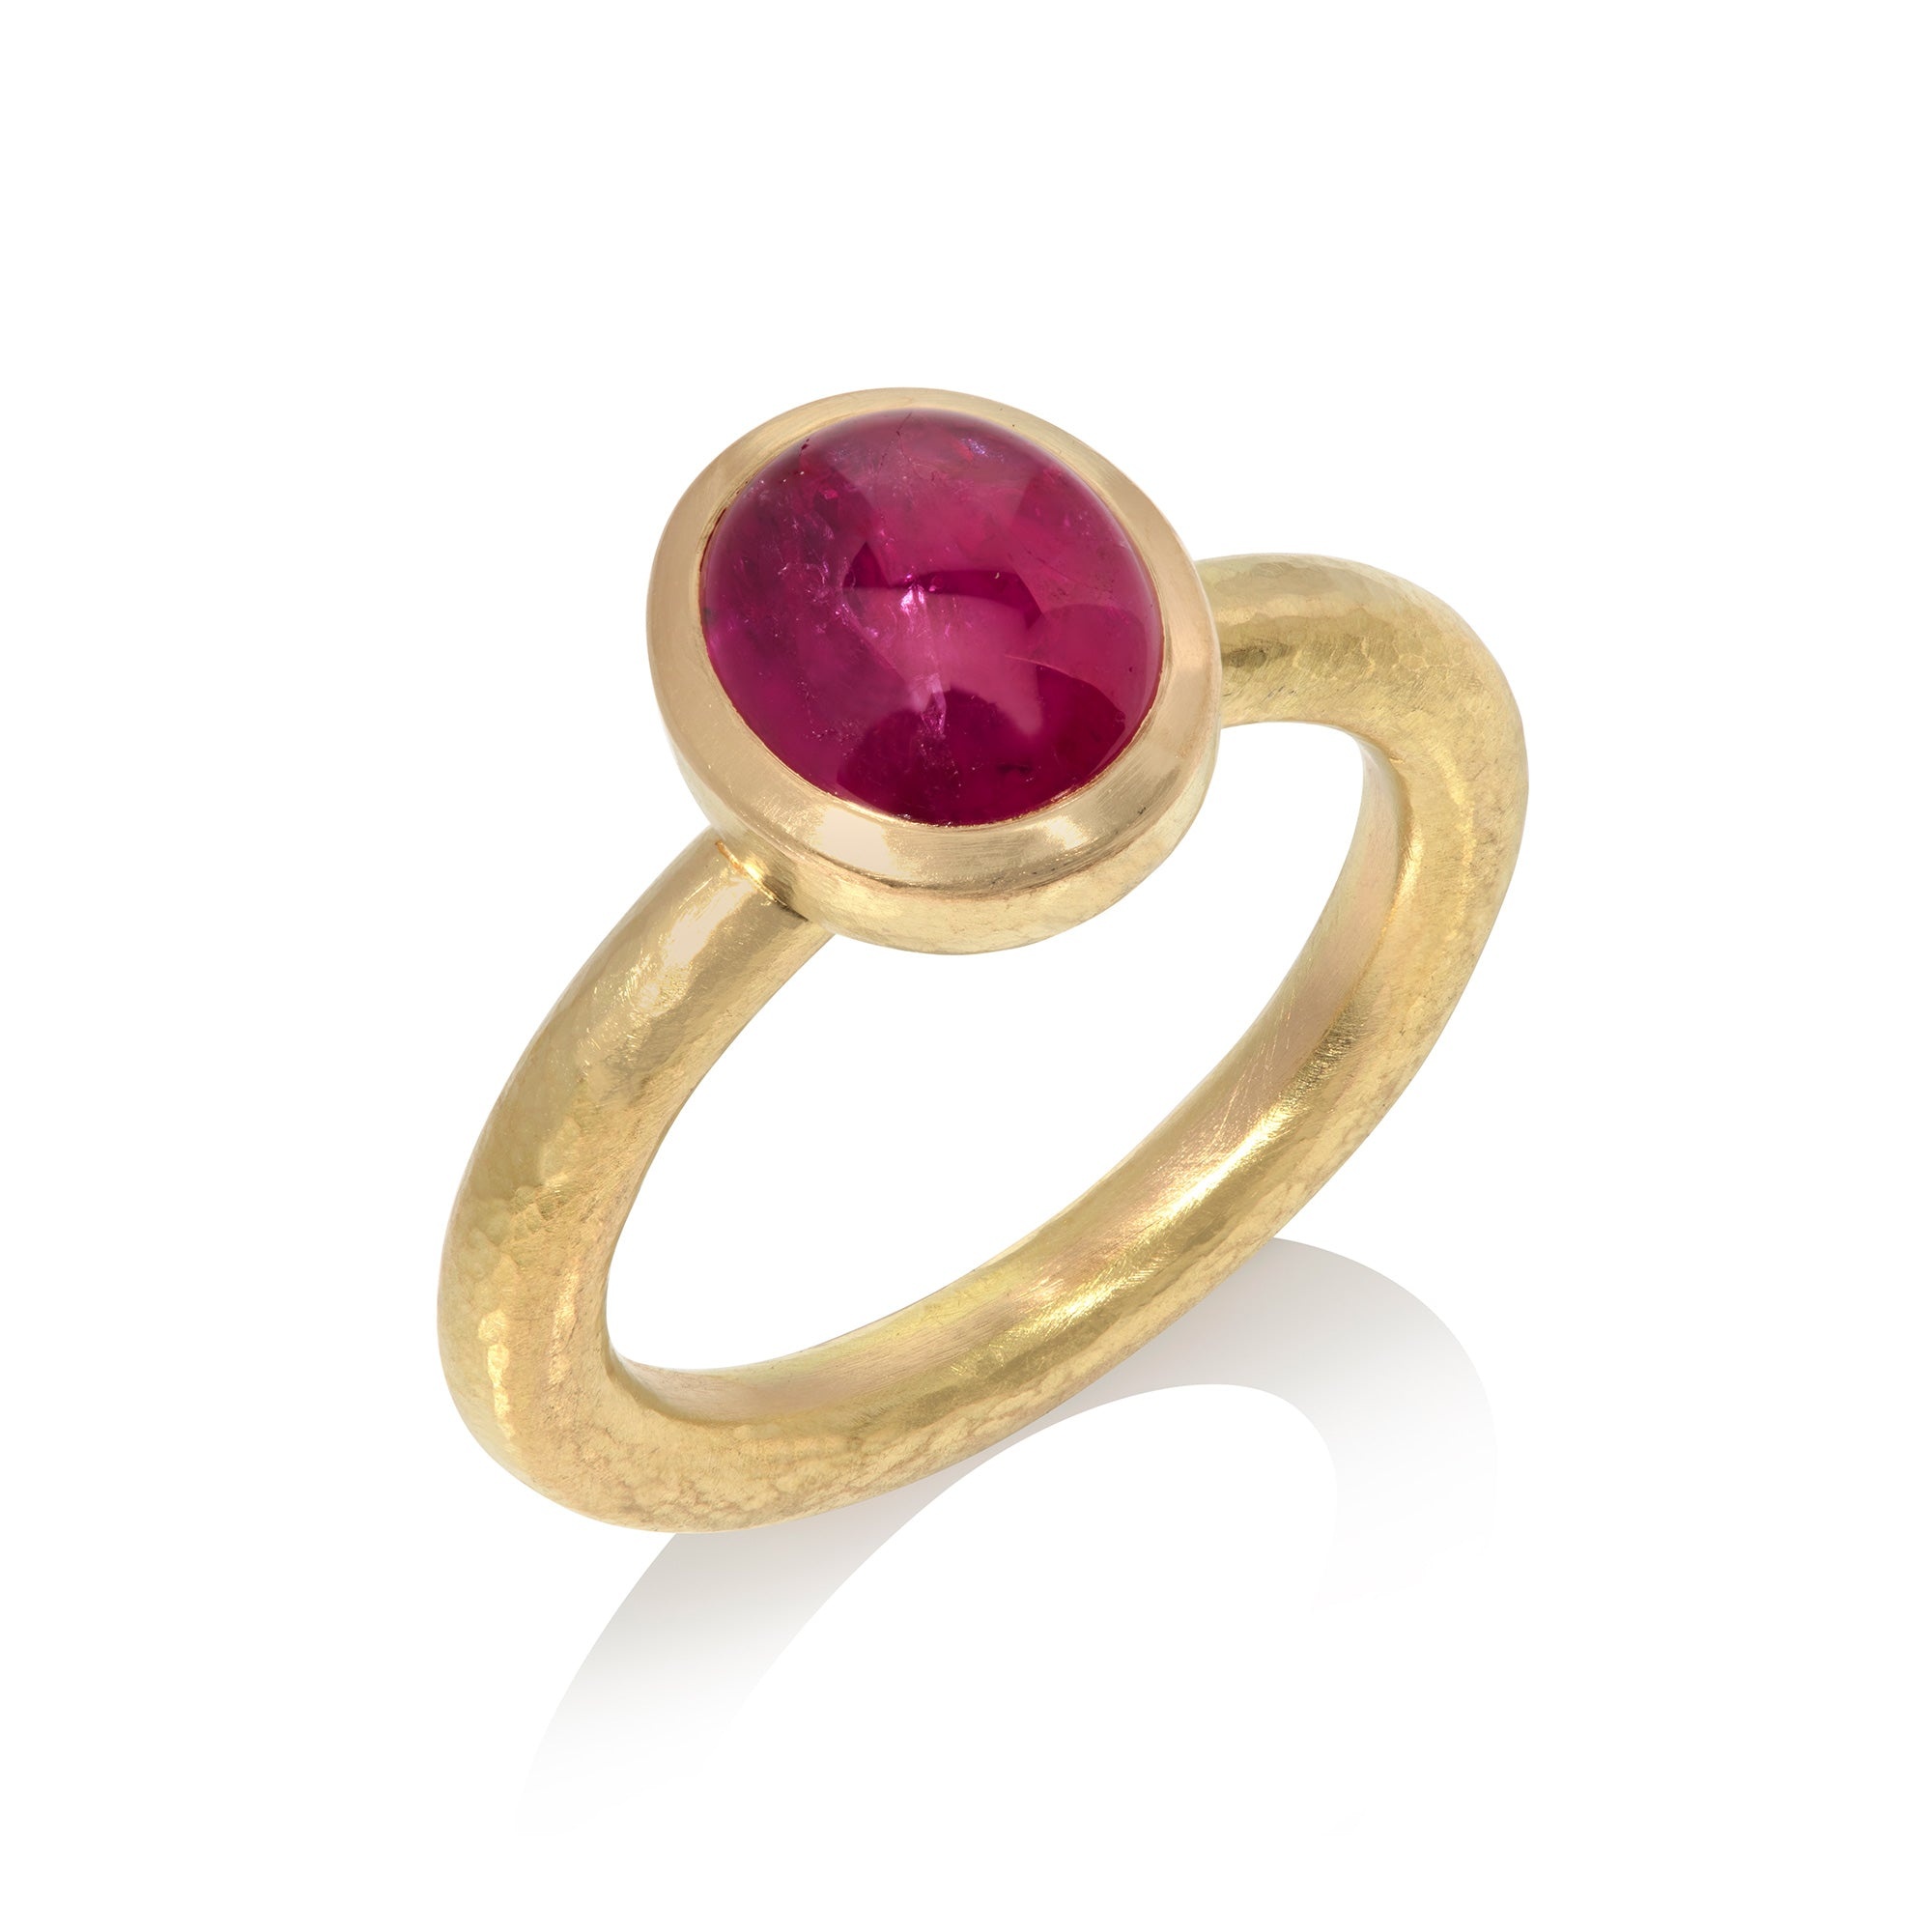 Cabochon jewelry, Yellow gold ruby, Handcrafted ring, Julia Lloyd George, 2000x2000 HD Handy